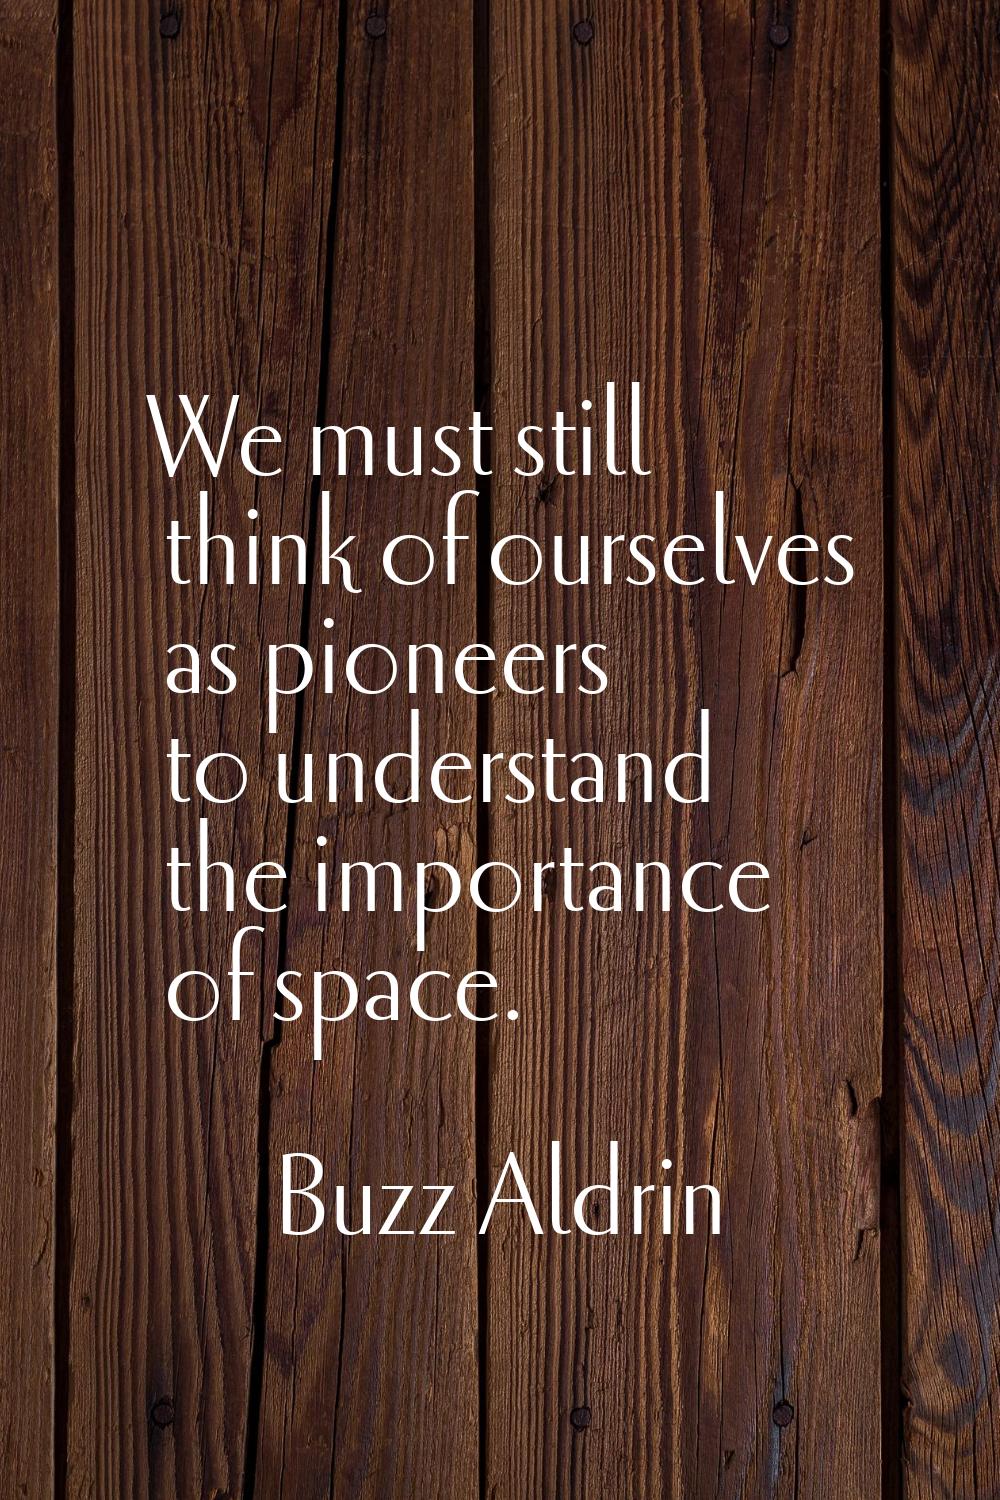 We must still think of ourselves as pioneers to understand the importance of space.